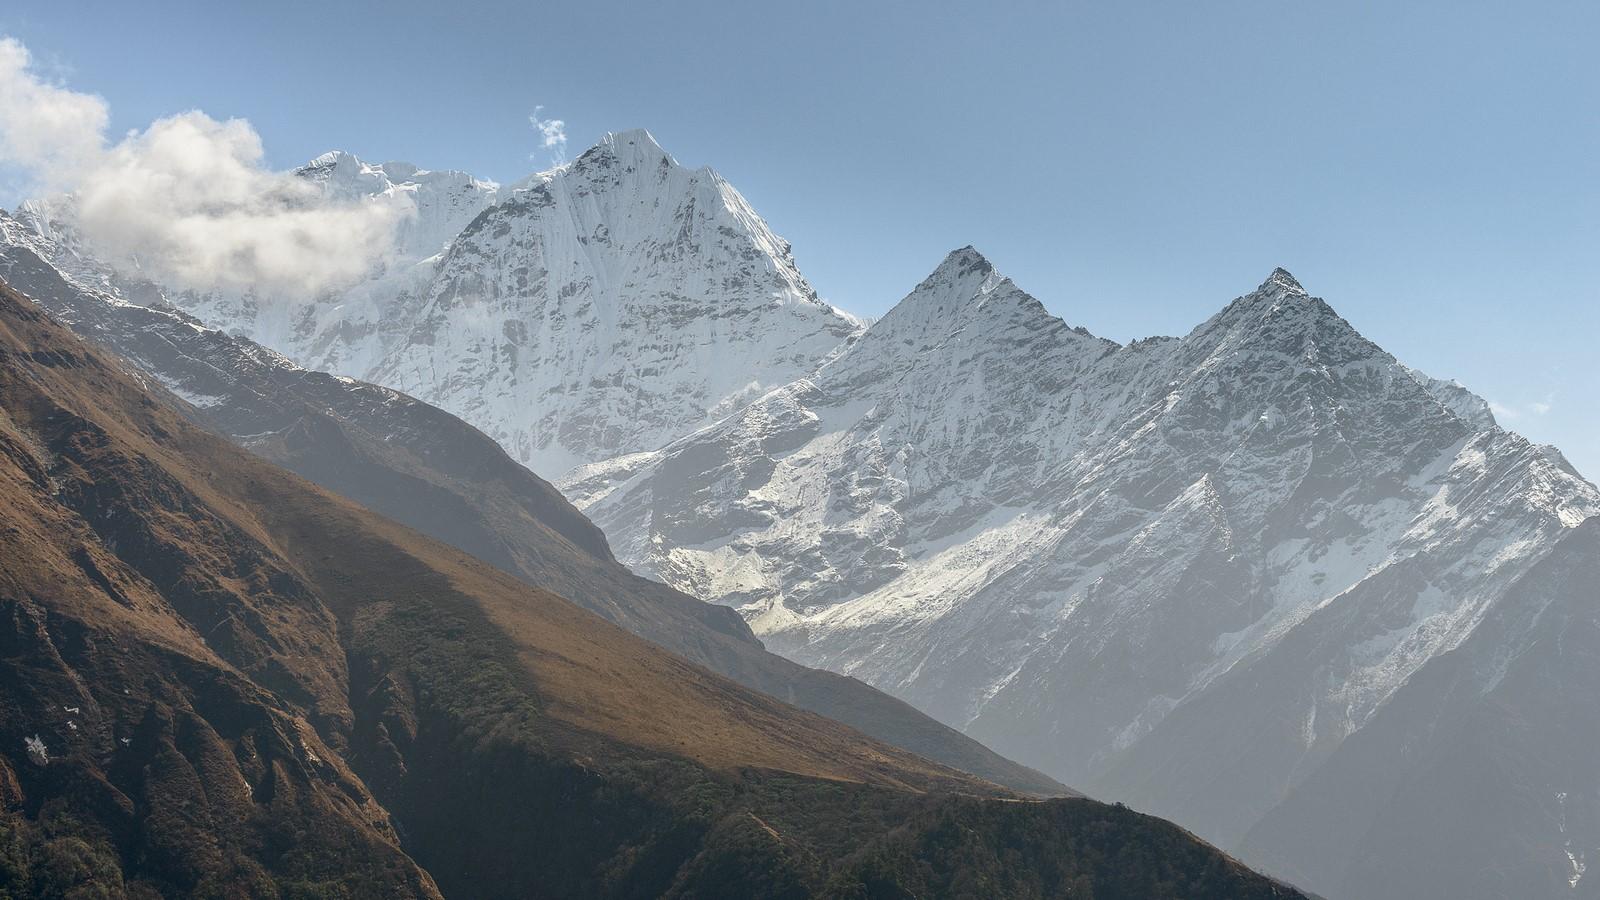 The Himalayas — where legends say the Yeti, or Abominable Snowman, roams.